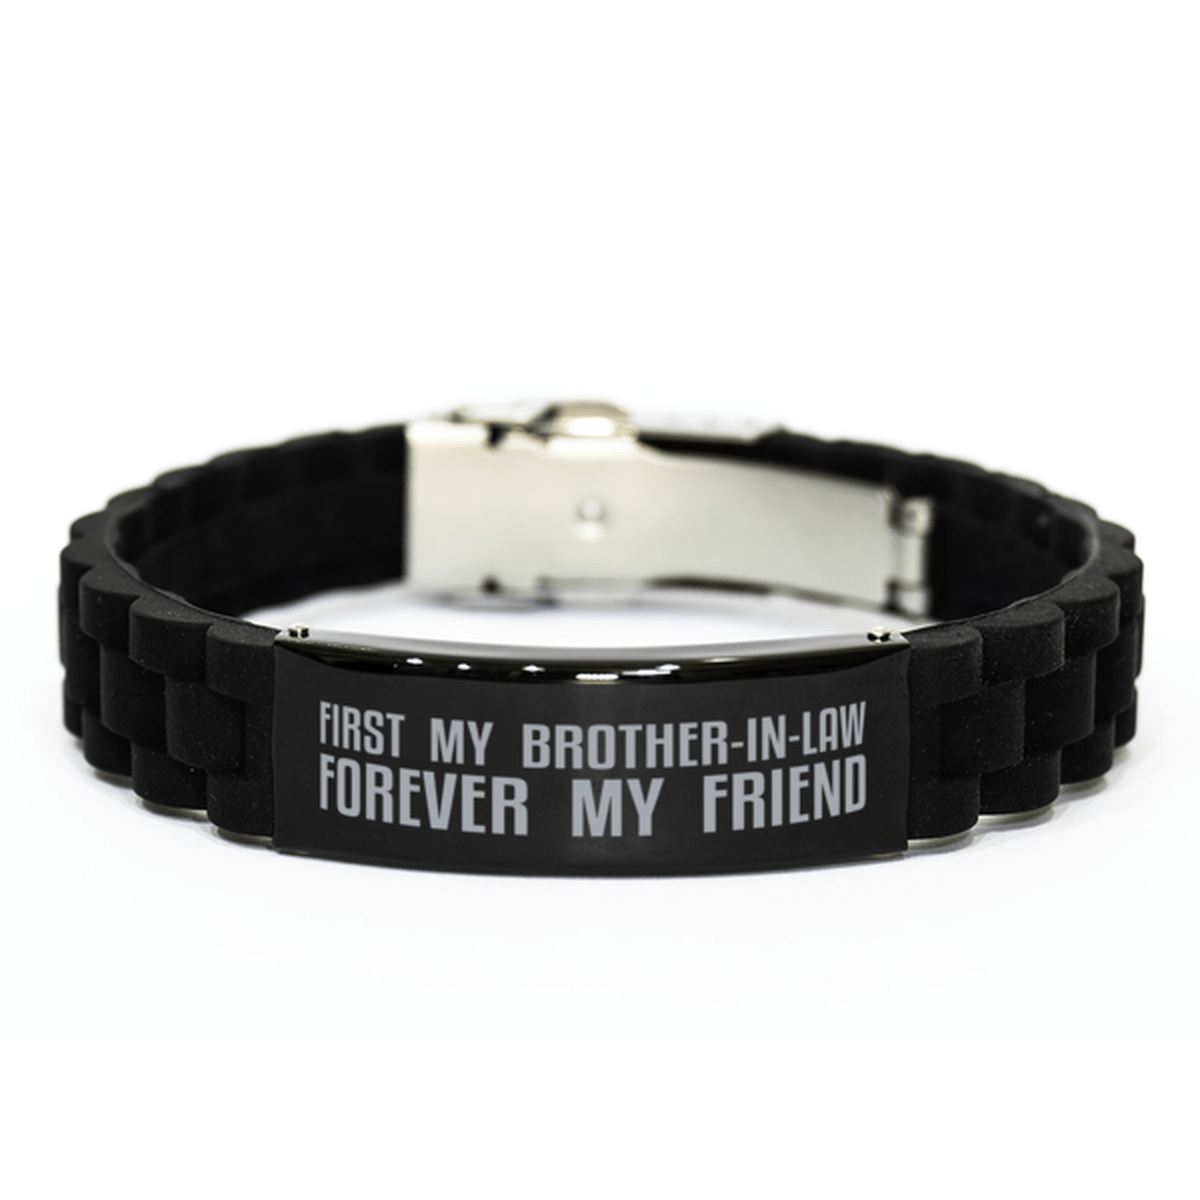 Unique Brother-in-law Bracelet, First My Brother-in-law Forever My Friend, Best Gift for Brother-in-law Birthday, Christmas